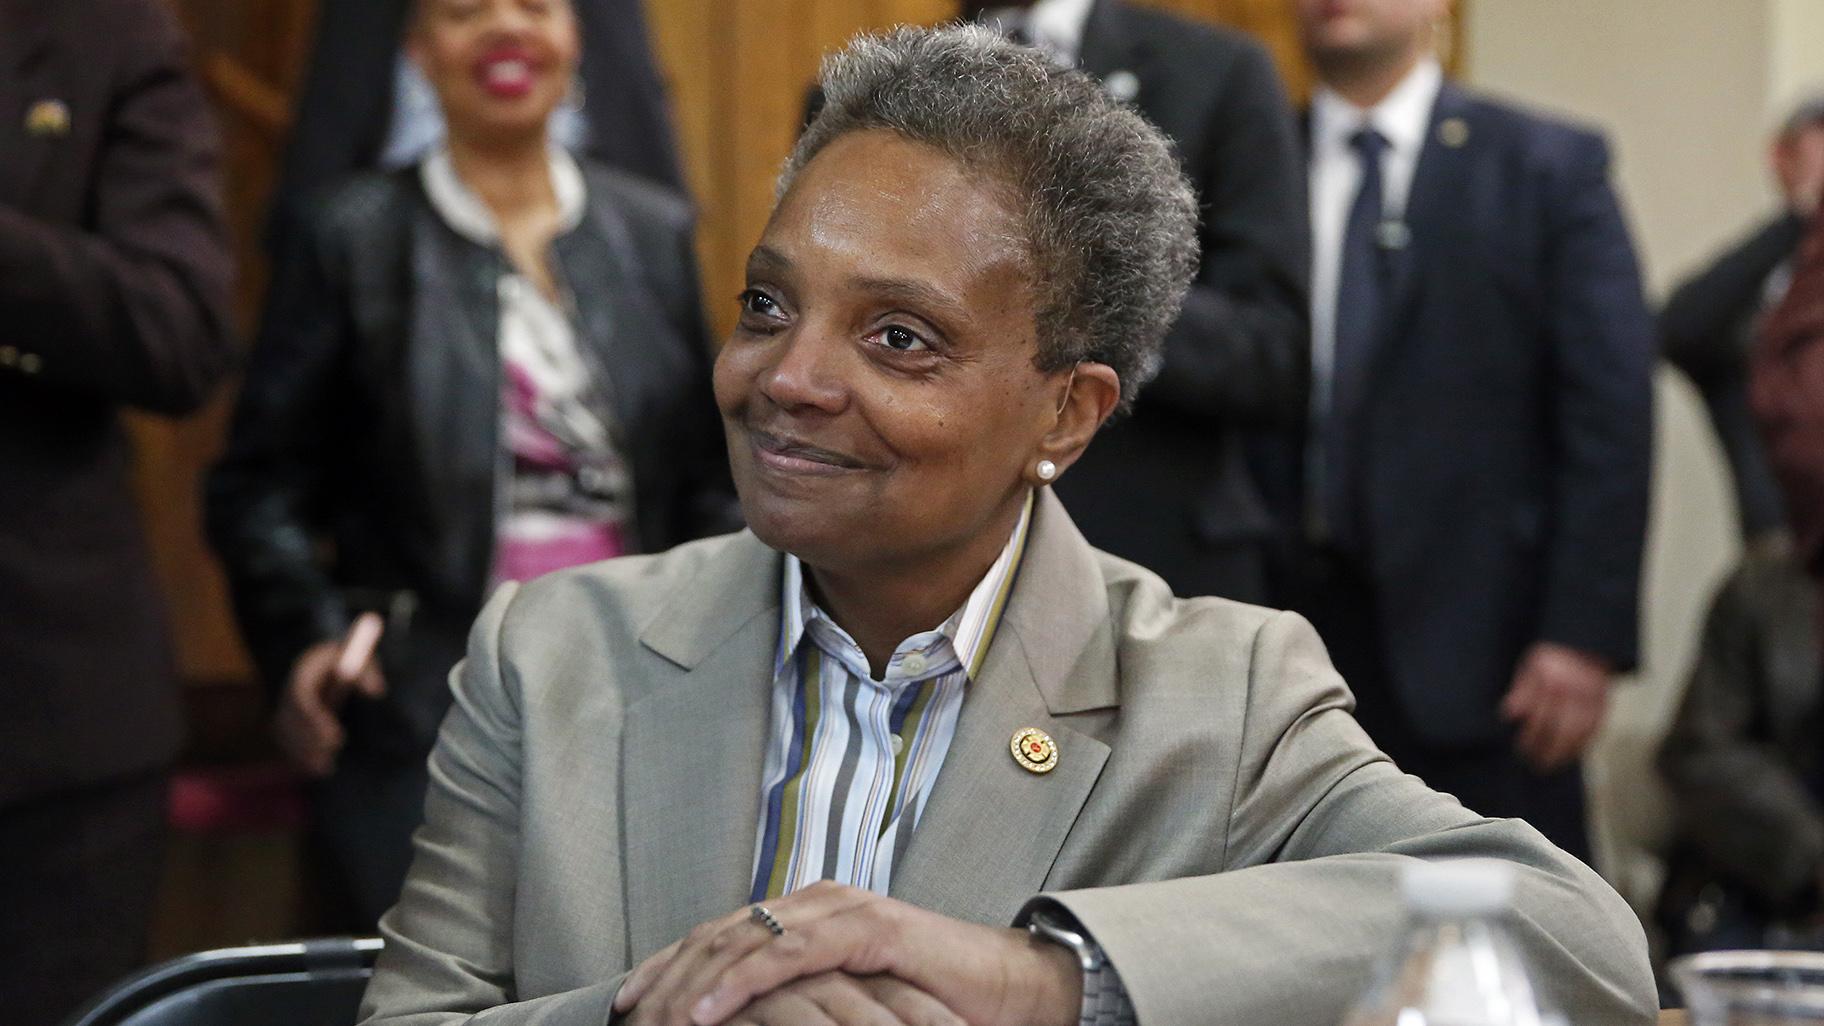 Chicago Mayor-elect Lori Lightfoot smiles during a press conference at the Rainbow PUSH organization on Wednesday, April 3, 2019. (AP Photo / Nuccio DiNuzzo)